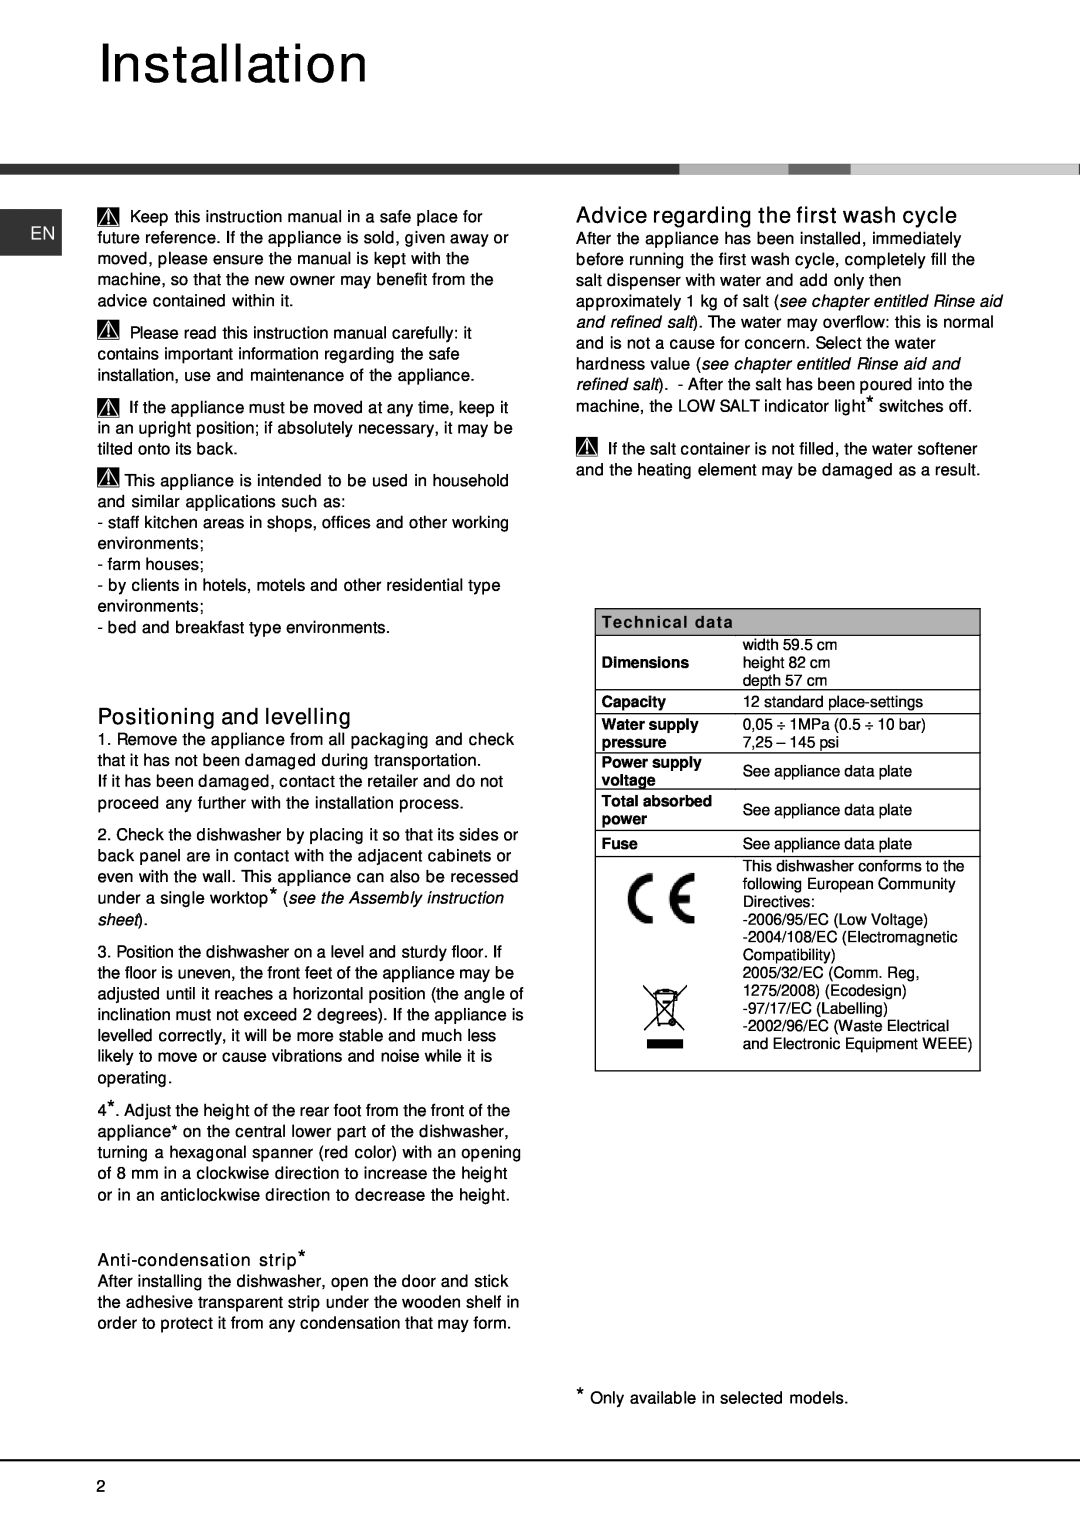 Hotpoint LFS 114 manual Installation, Positioning and levelling, Advice regarding the first wash cycle, Technical data 